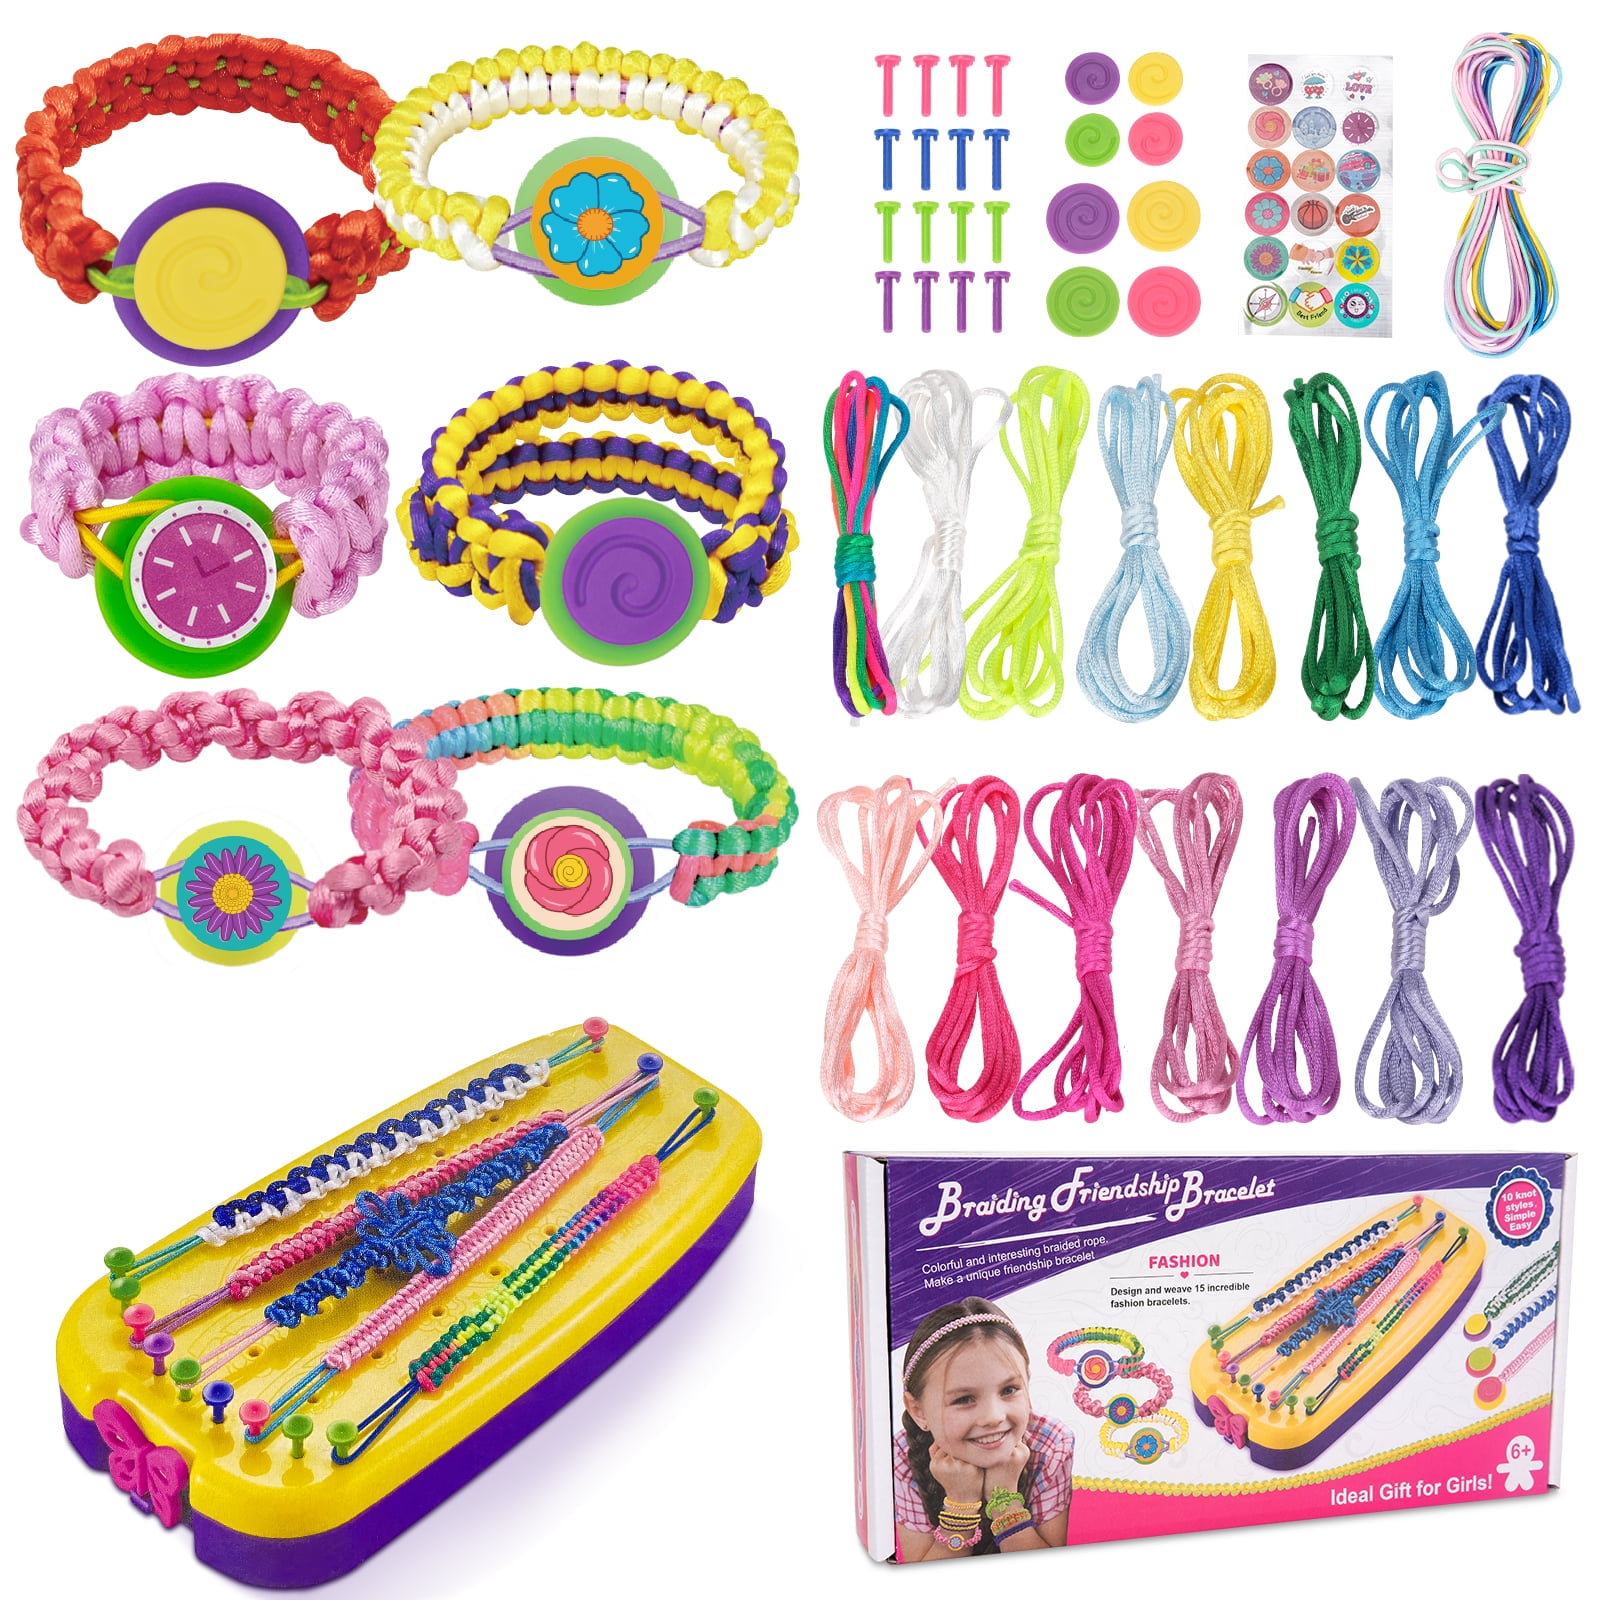 TOYTION Friendship Bracelet Kit for Teen Girls, DIY Charm Bracelet Loom  Making Kits Toys for 6 7 8 9 10 11 12 Year Old Girls, Arts and Crafts  Jewelry